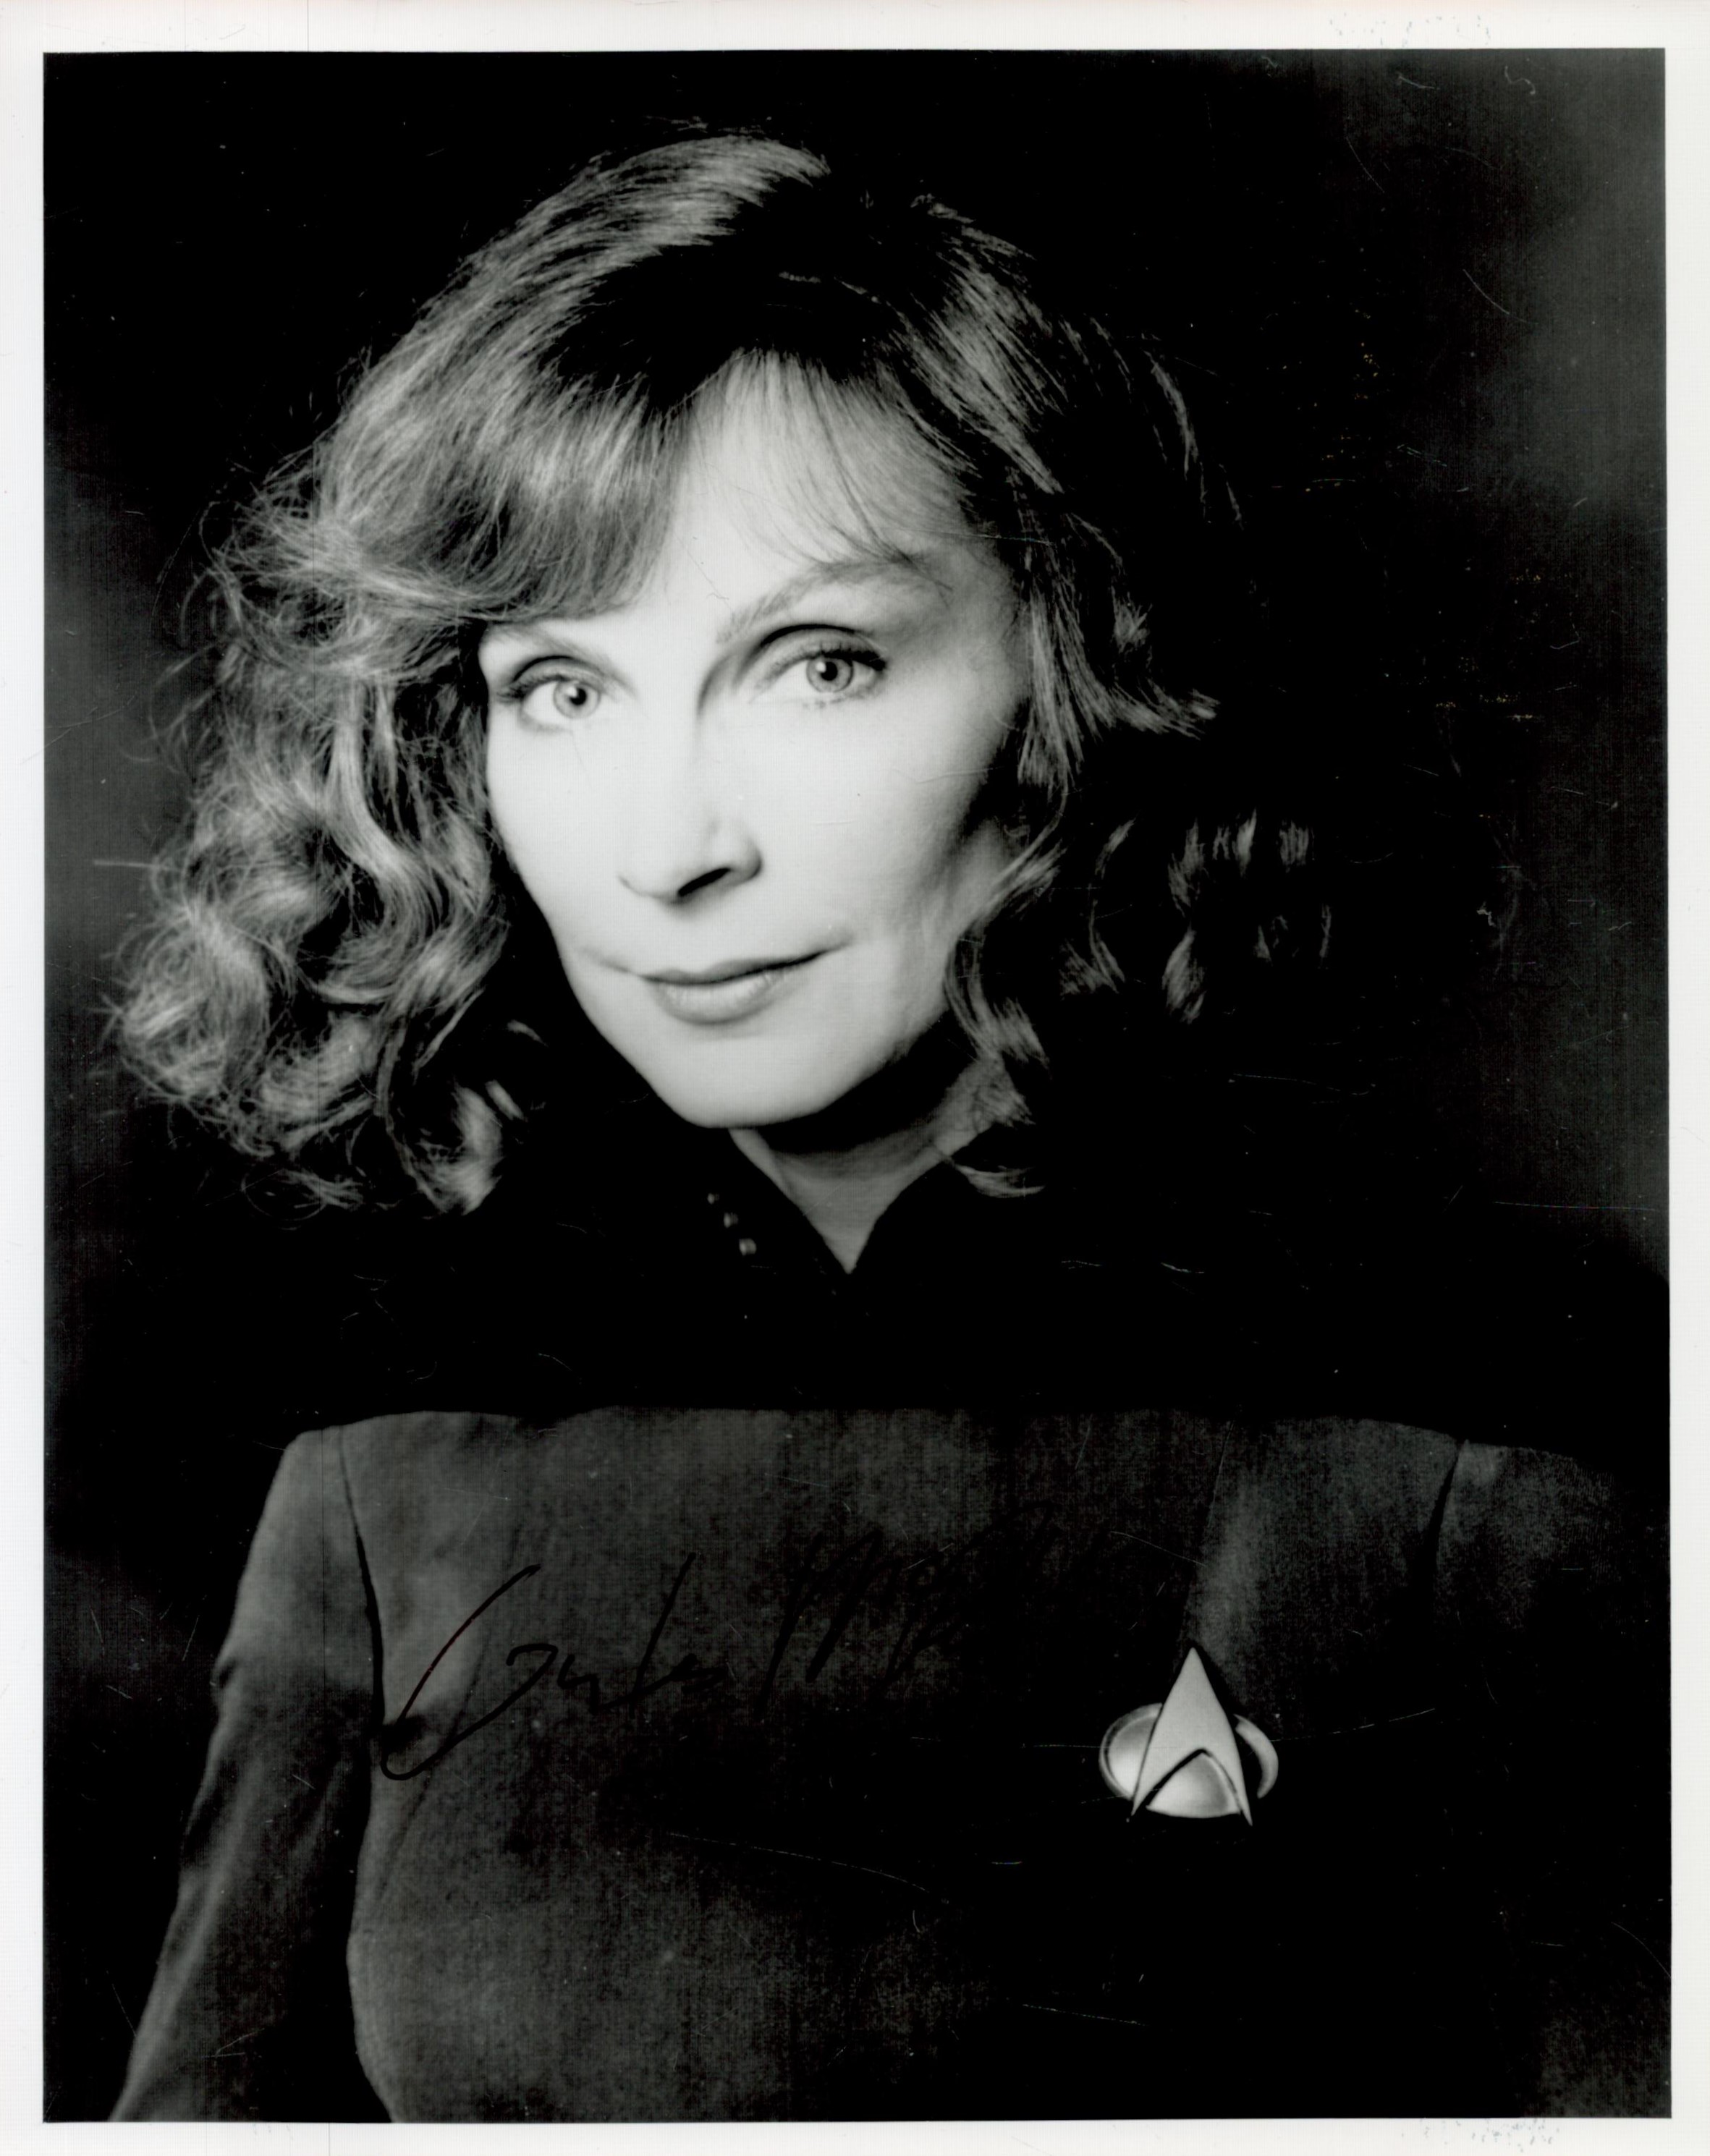 Gates McFadden signed 10x8 inch Star Trek black and white photo. Good Condition. All autographs come